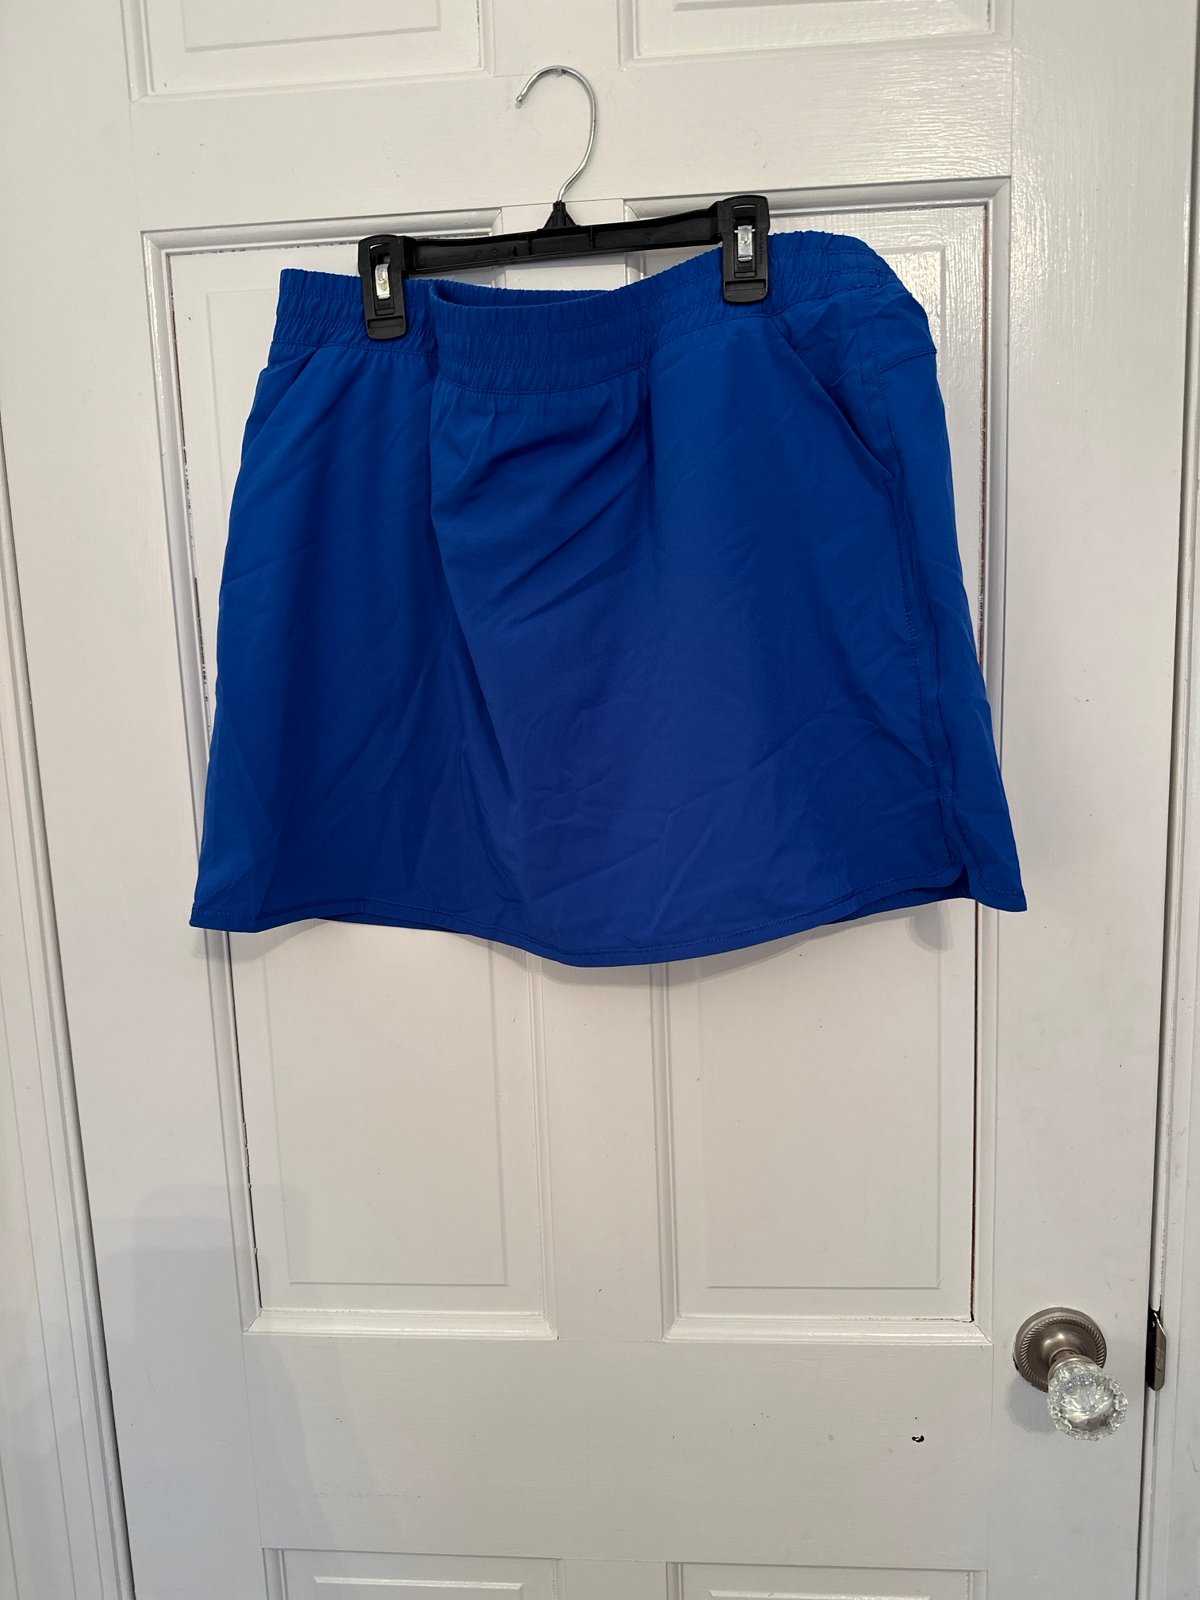 save up to 70% Calvin Klein Performance Blue tennis skort NWT size XXL MKPetBbJ2 all for you